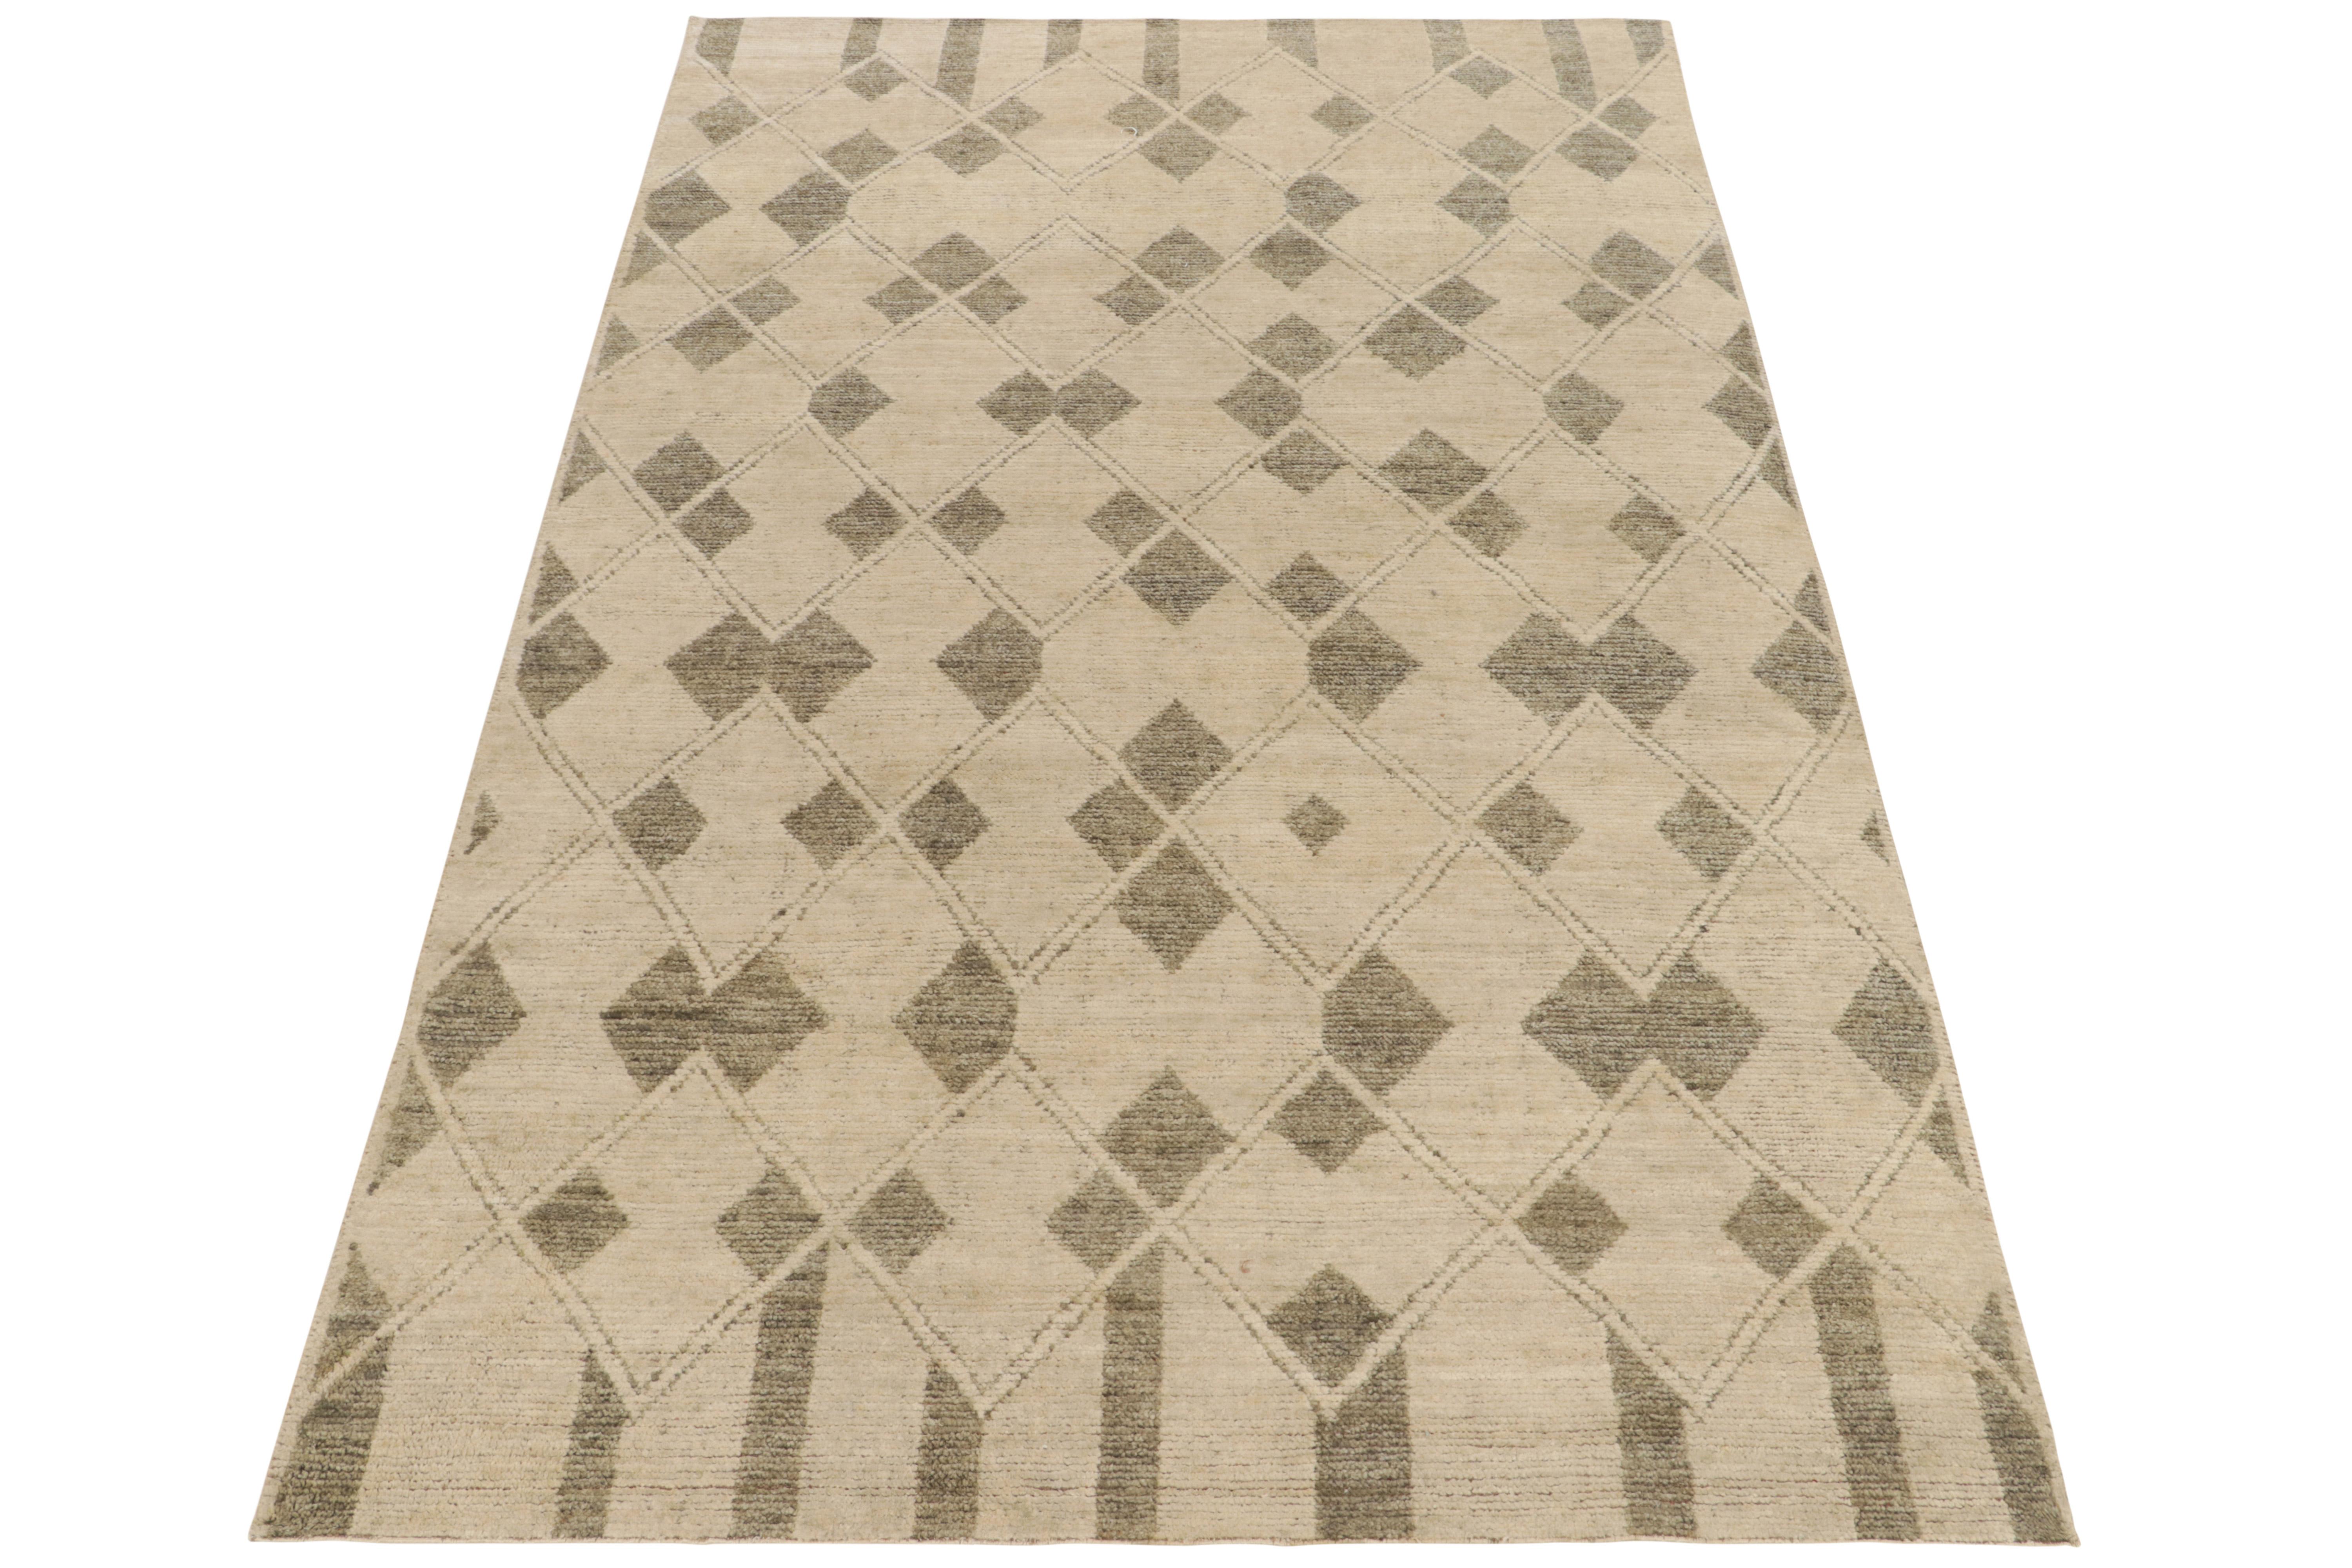 Tribal Rug & Kilim’s Moroccan Style Rug in Beige-Brown Diamond Patterns For Sale